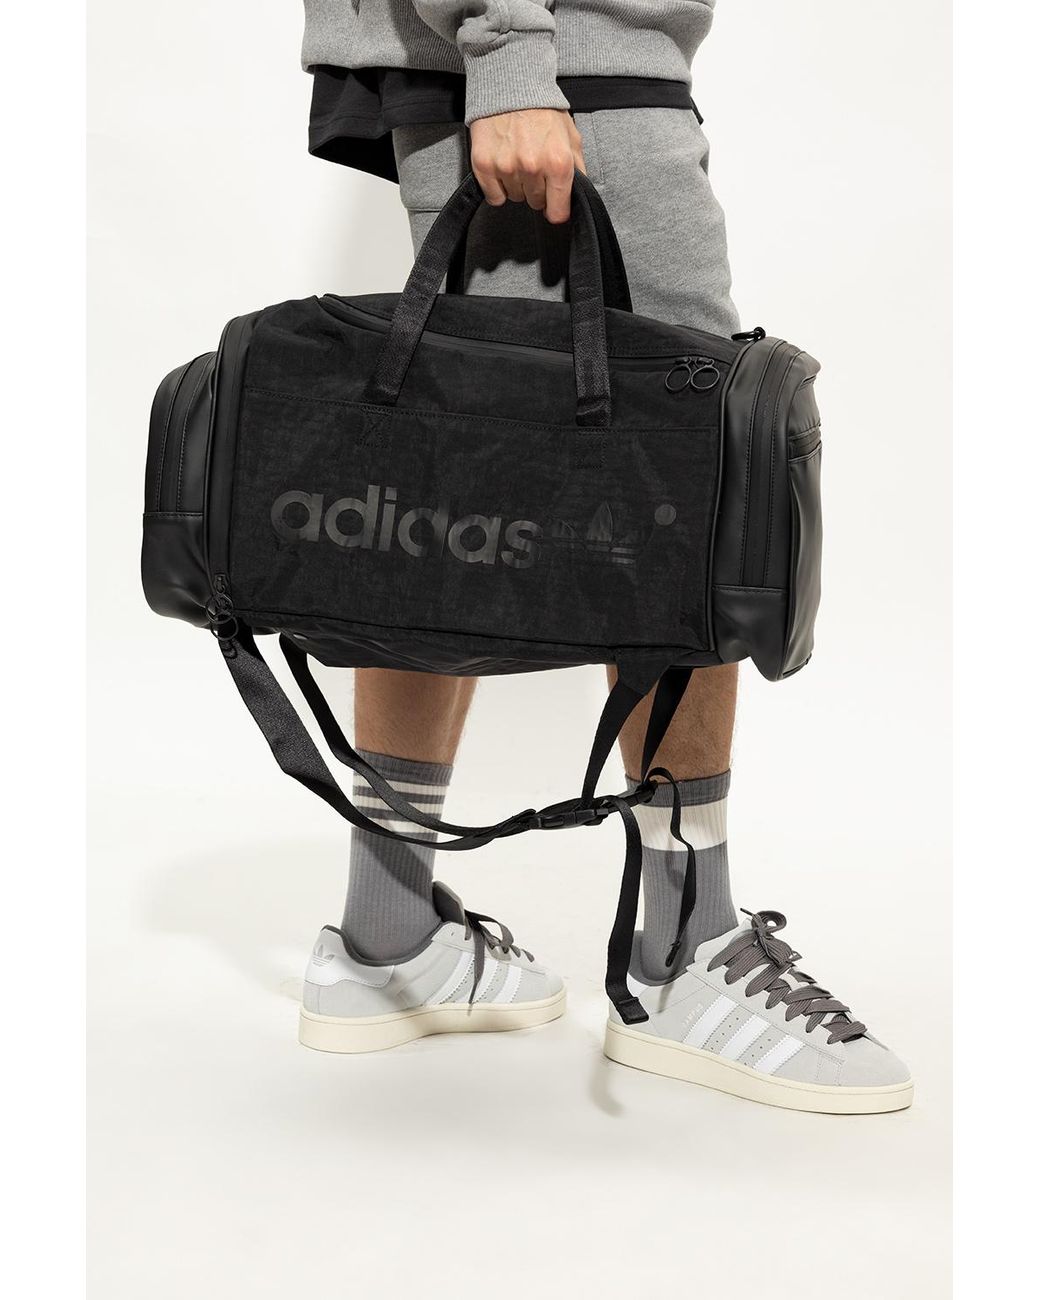 ADIDAS (Expandable) CONVERTIBLE 3-STRIPES Duffel Without Wheels Blue -  Price in India | Flipkart.com